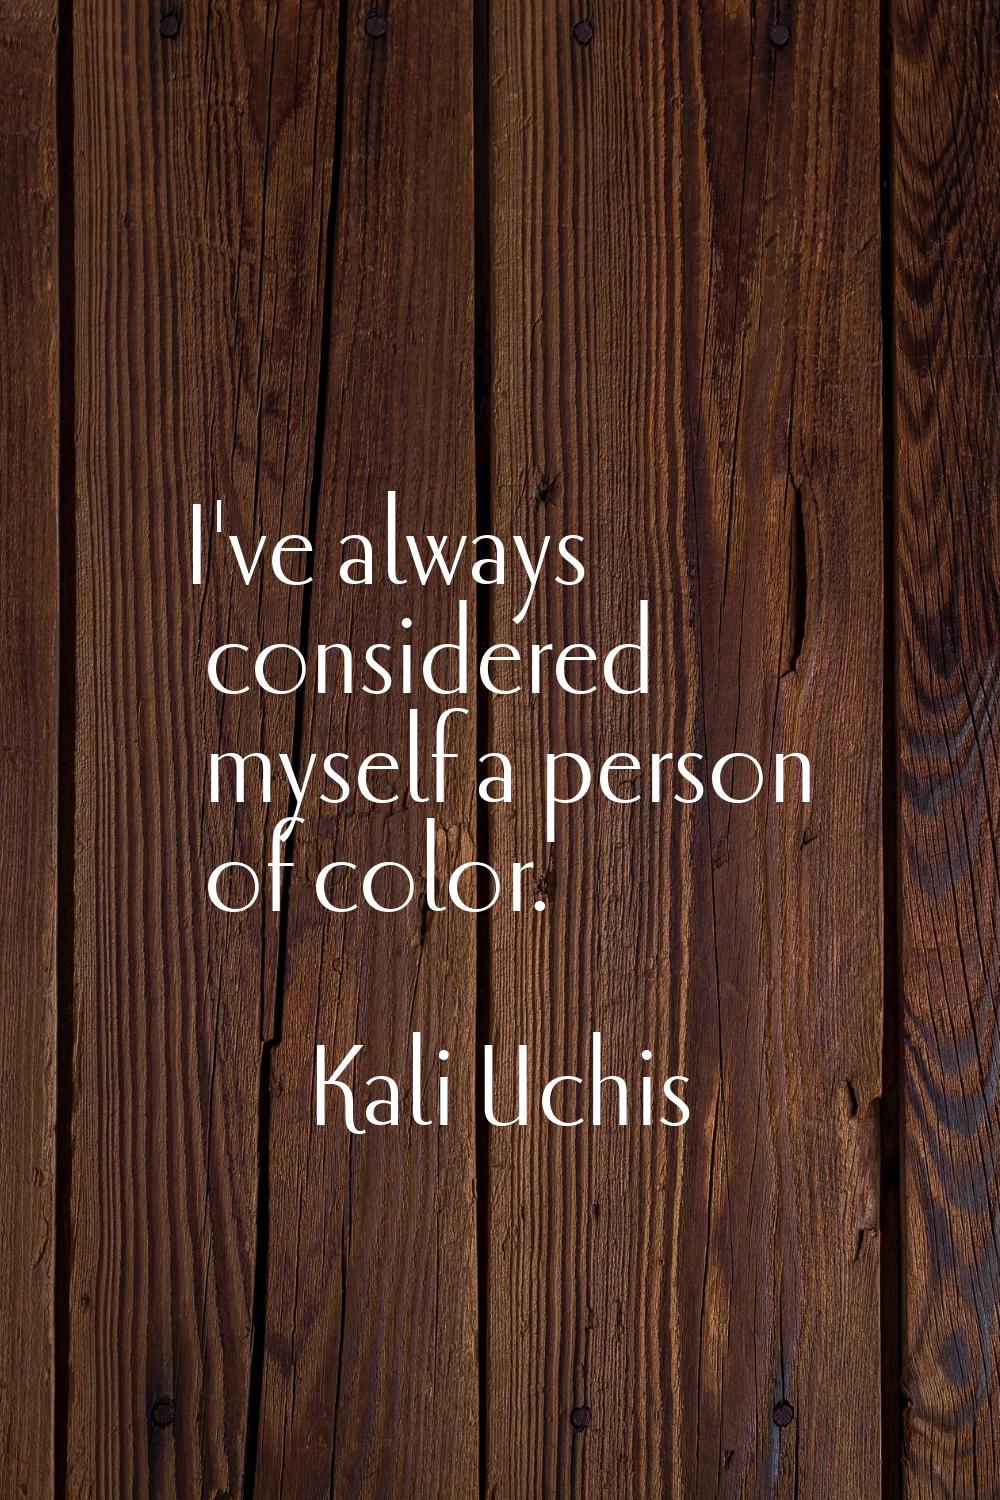 I've always considered myself a person of color.